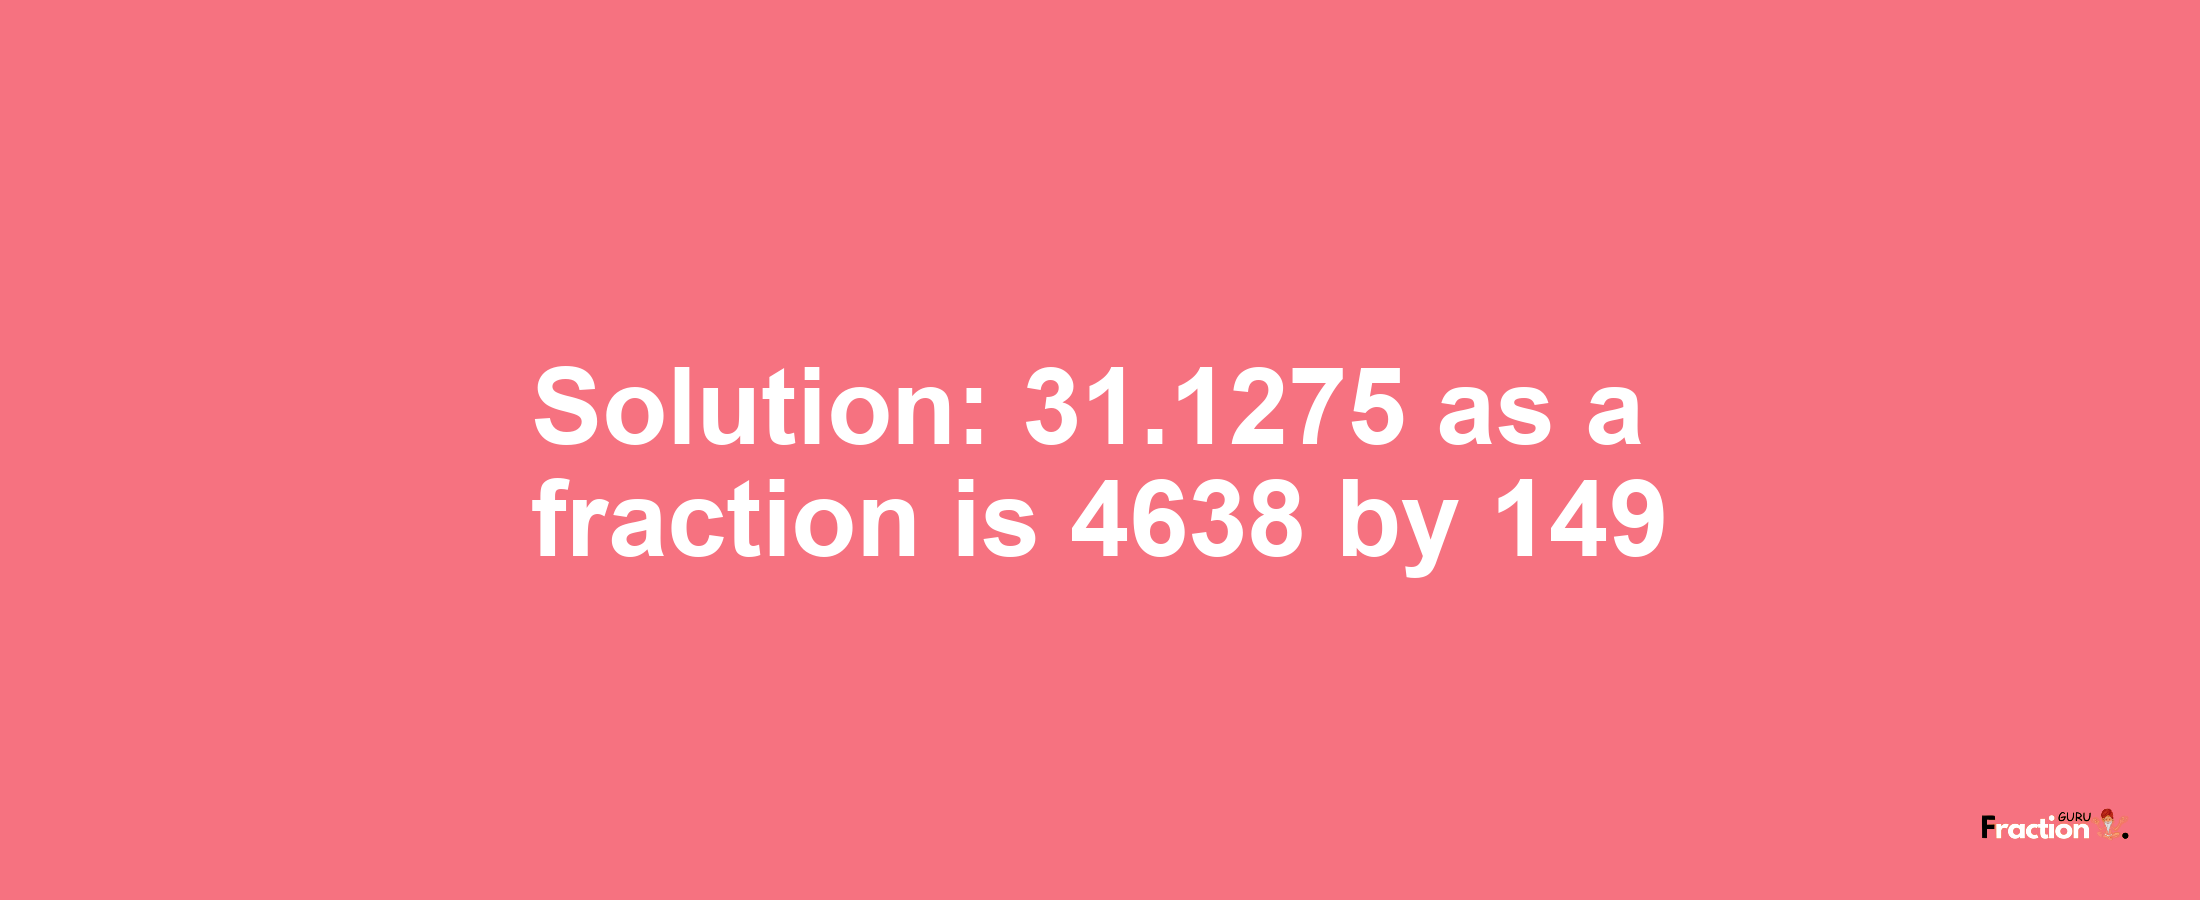 Solution:31.1275 as a fraction is 4638/149